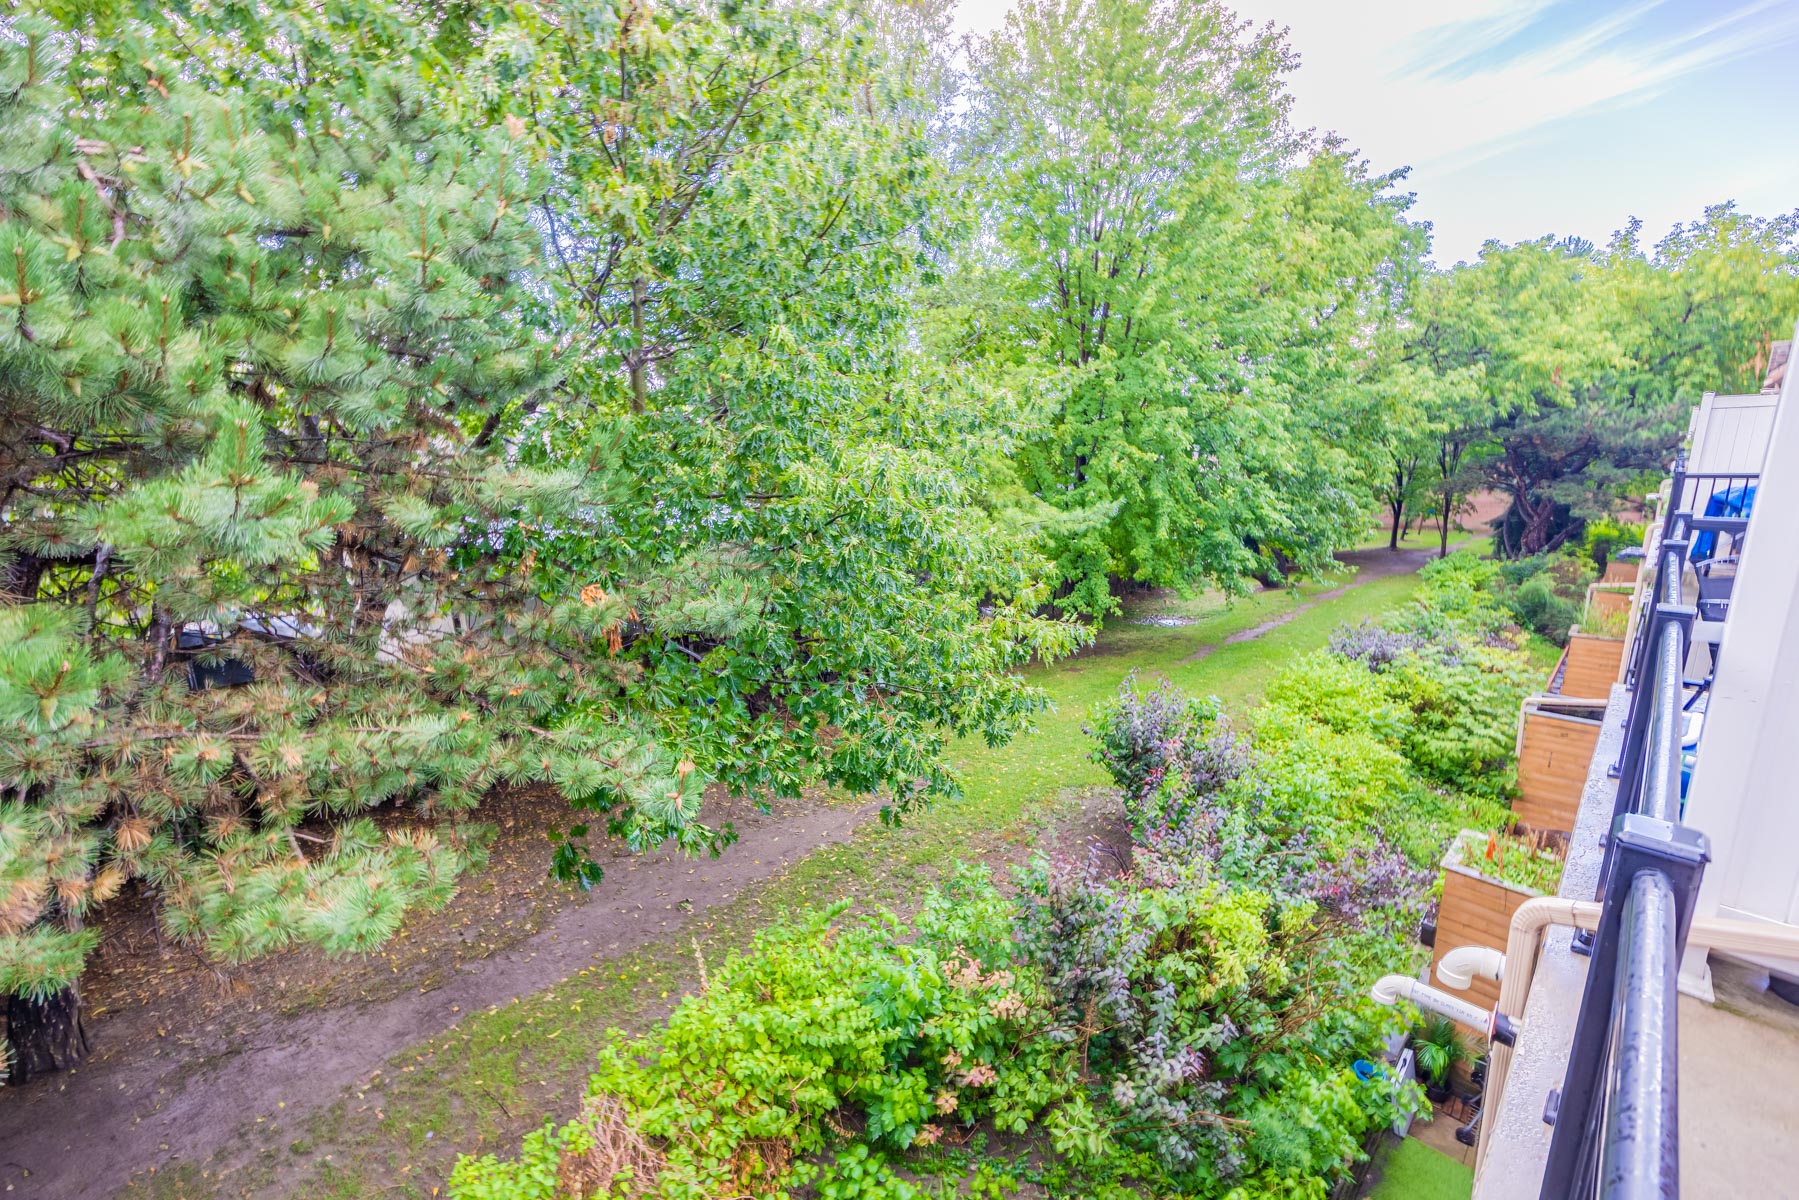 View of lush trees and grass from balcony of 95 George Appleton Way Unit 2162.